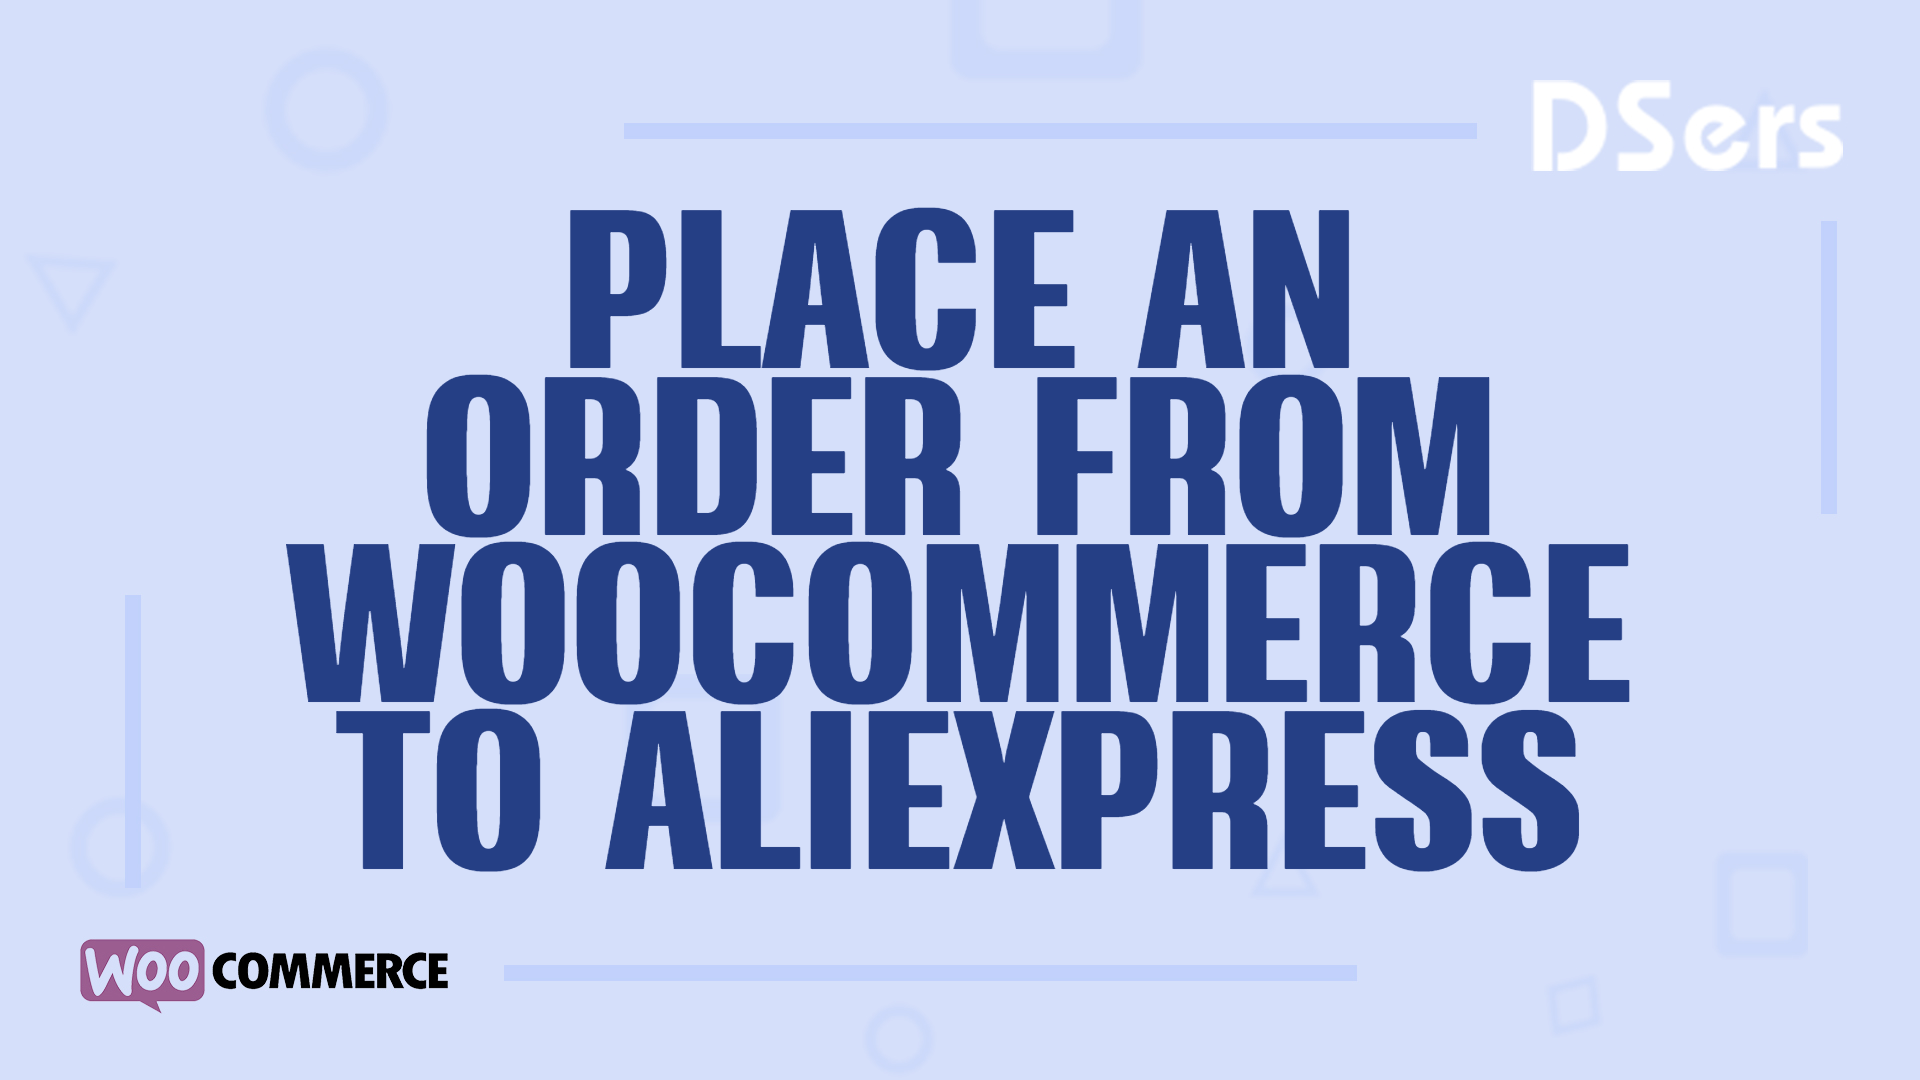 Place an order from WooCommerce to AliExpress